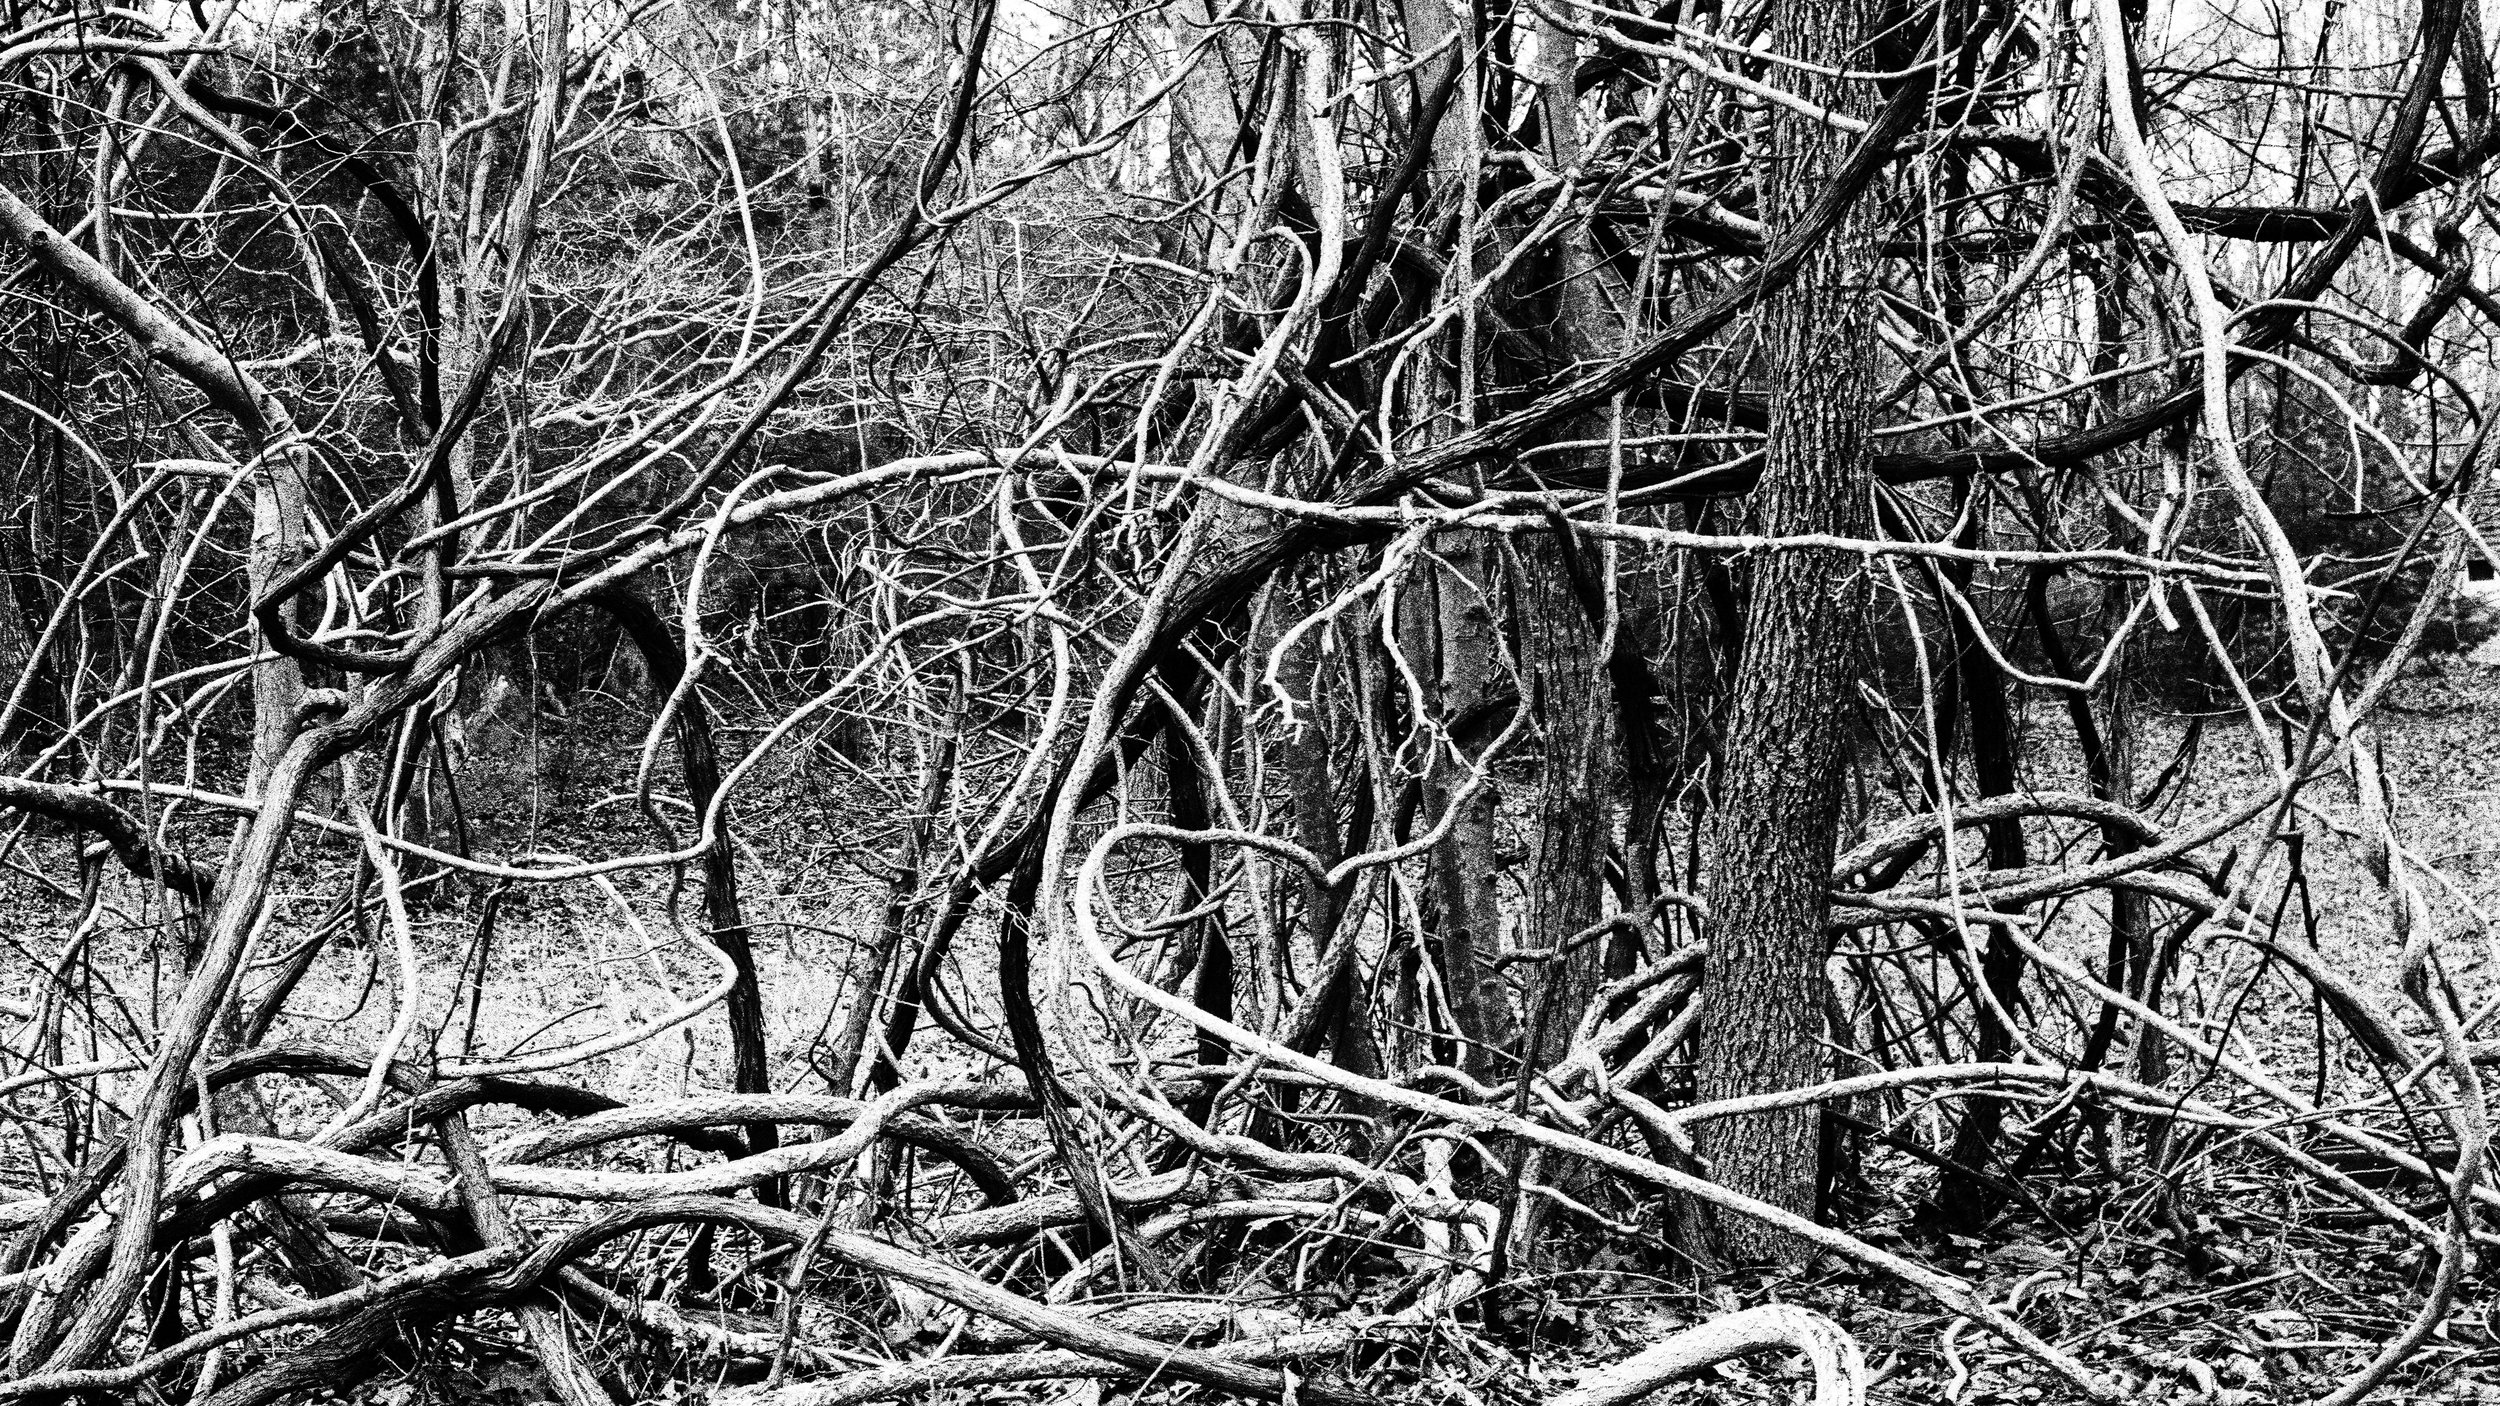 intertwined vines and the texture of trees | hasselblad | xpan cinestill xx | keith mendenhall